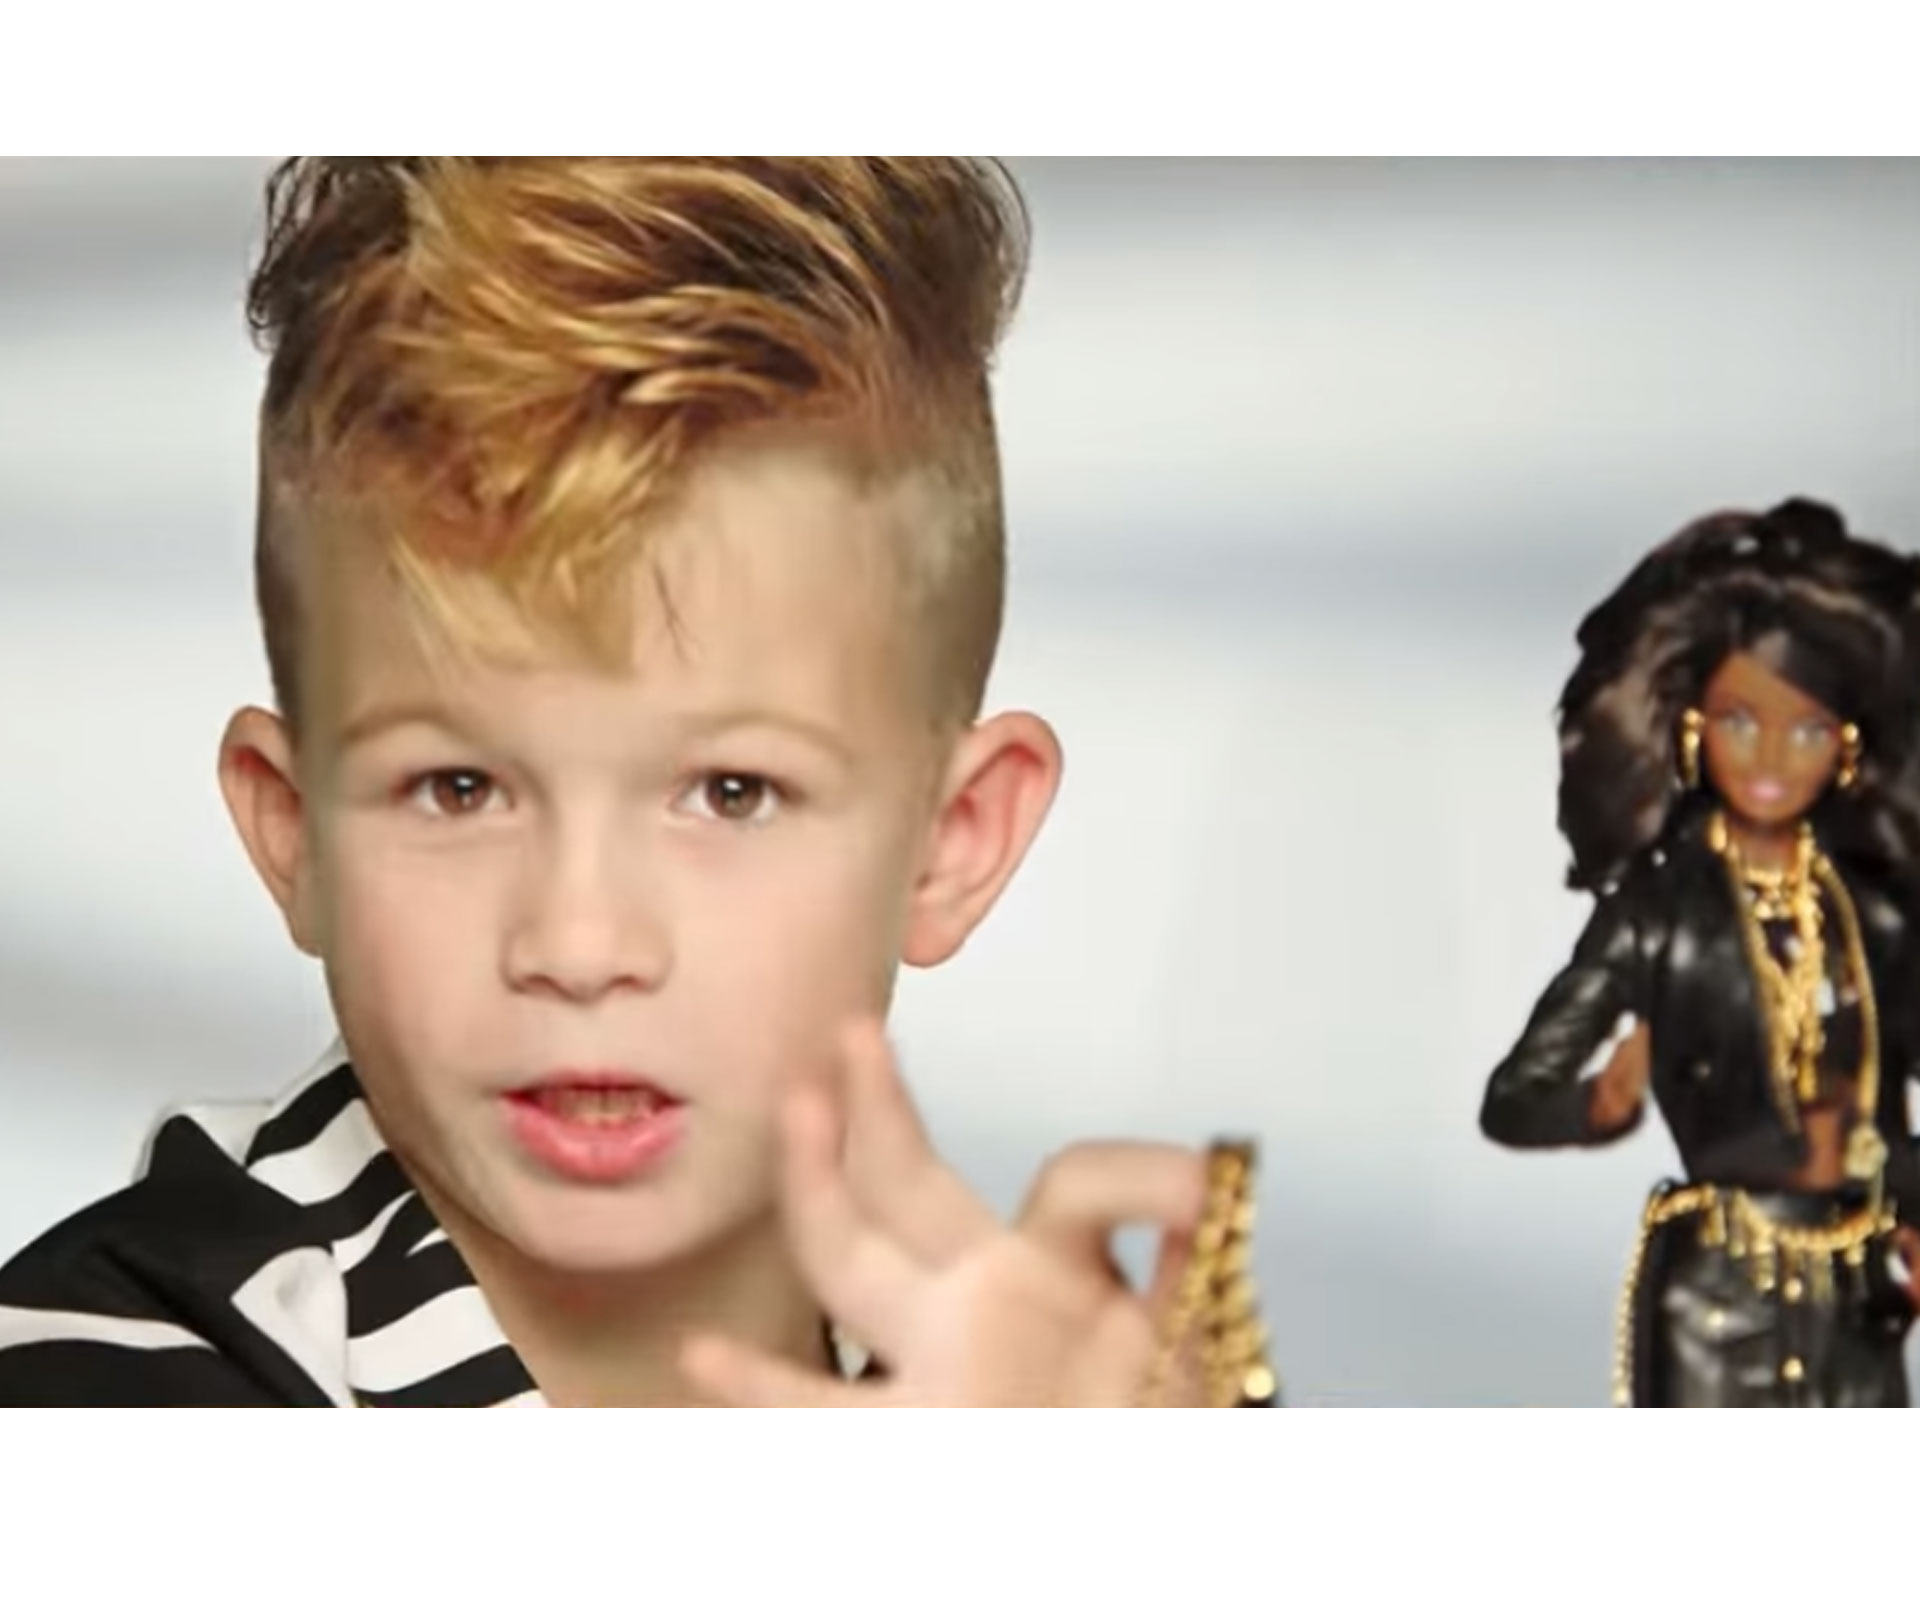 Little boy in Moschino Barbie commercial